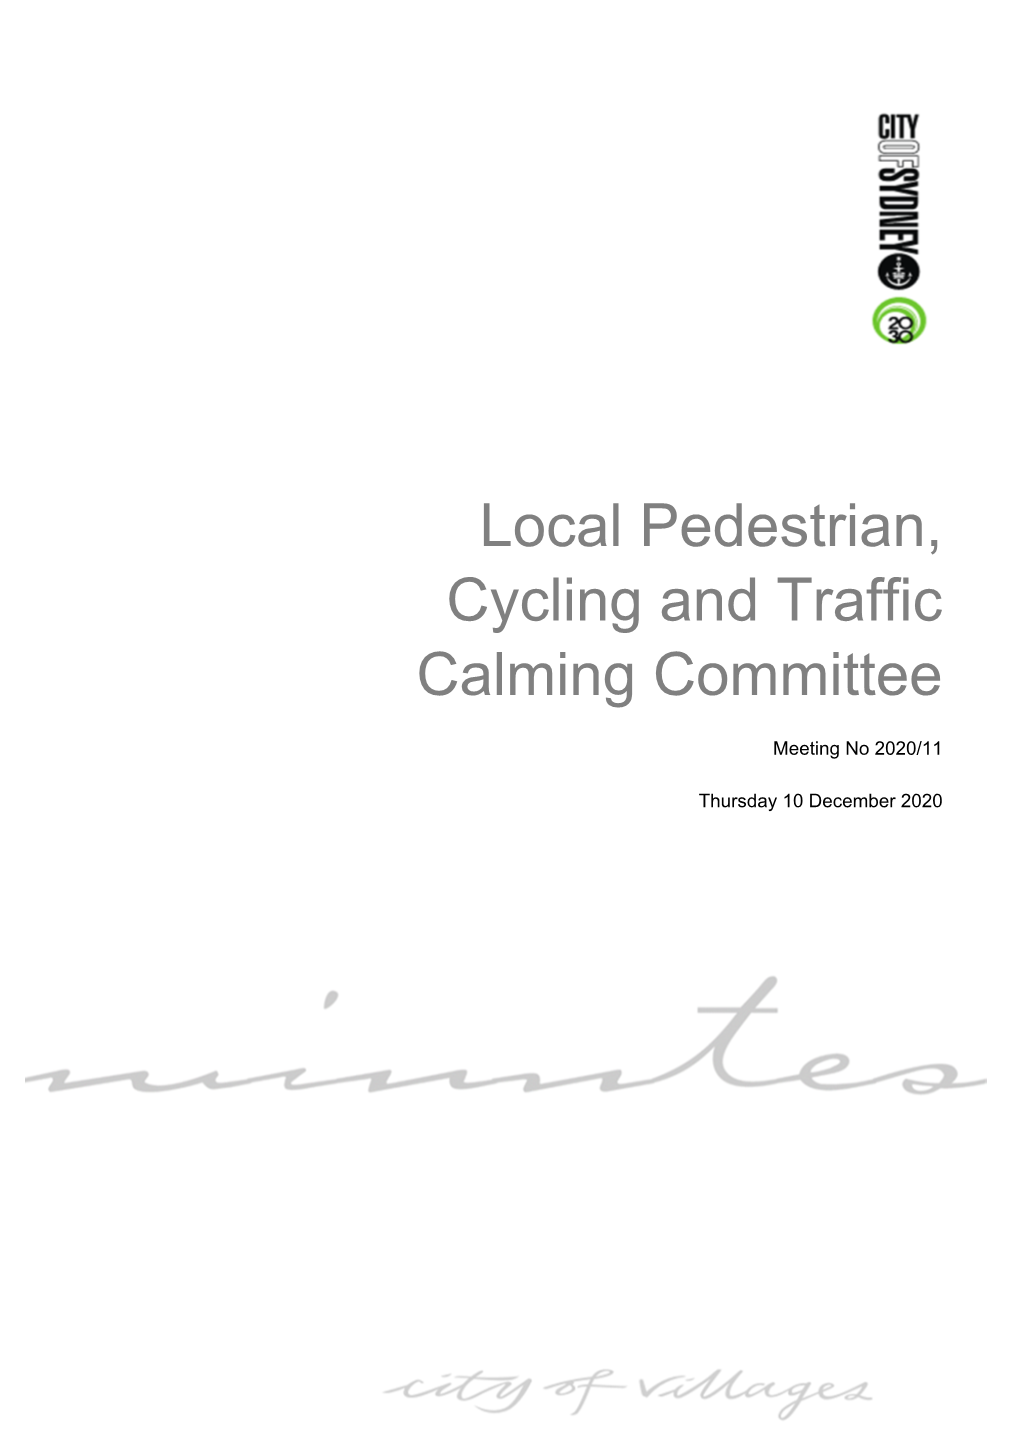 Local Pedestrian, Cycling and Traffic Calming Committee